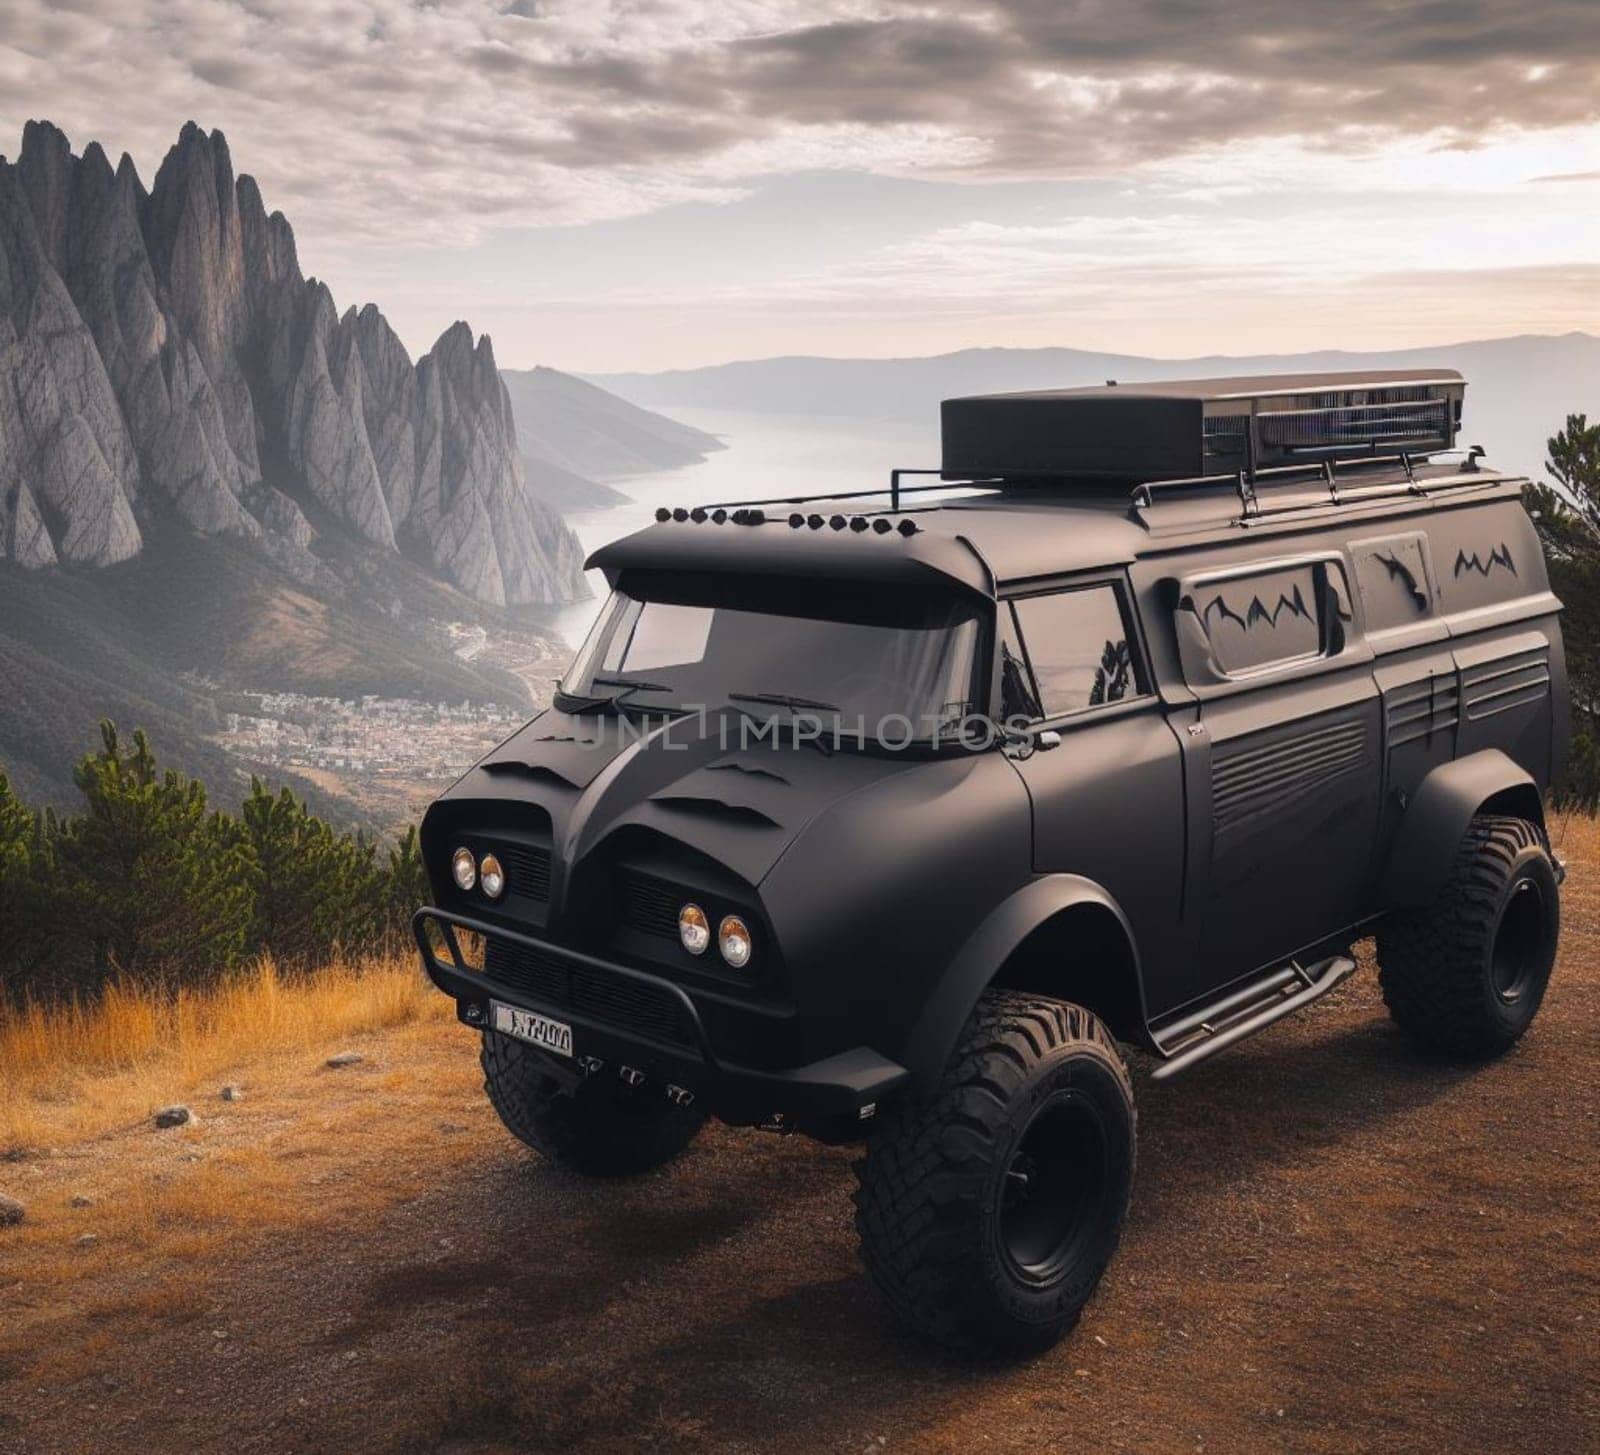 rusty dirt offroad 4x4 lifted vintage custom camper conversion jeep overlanding in mountain roads, nomadic lifestyle, adventure living, ai generated